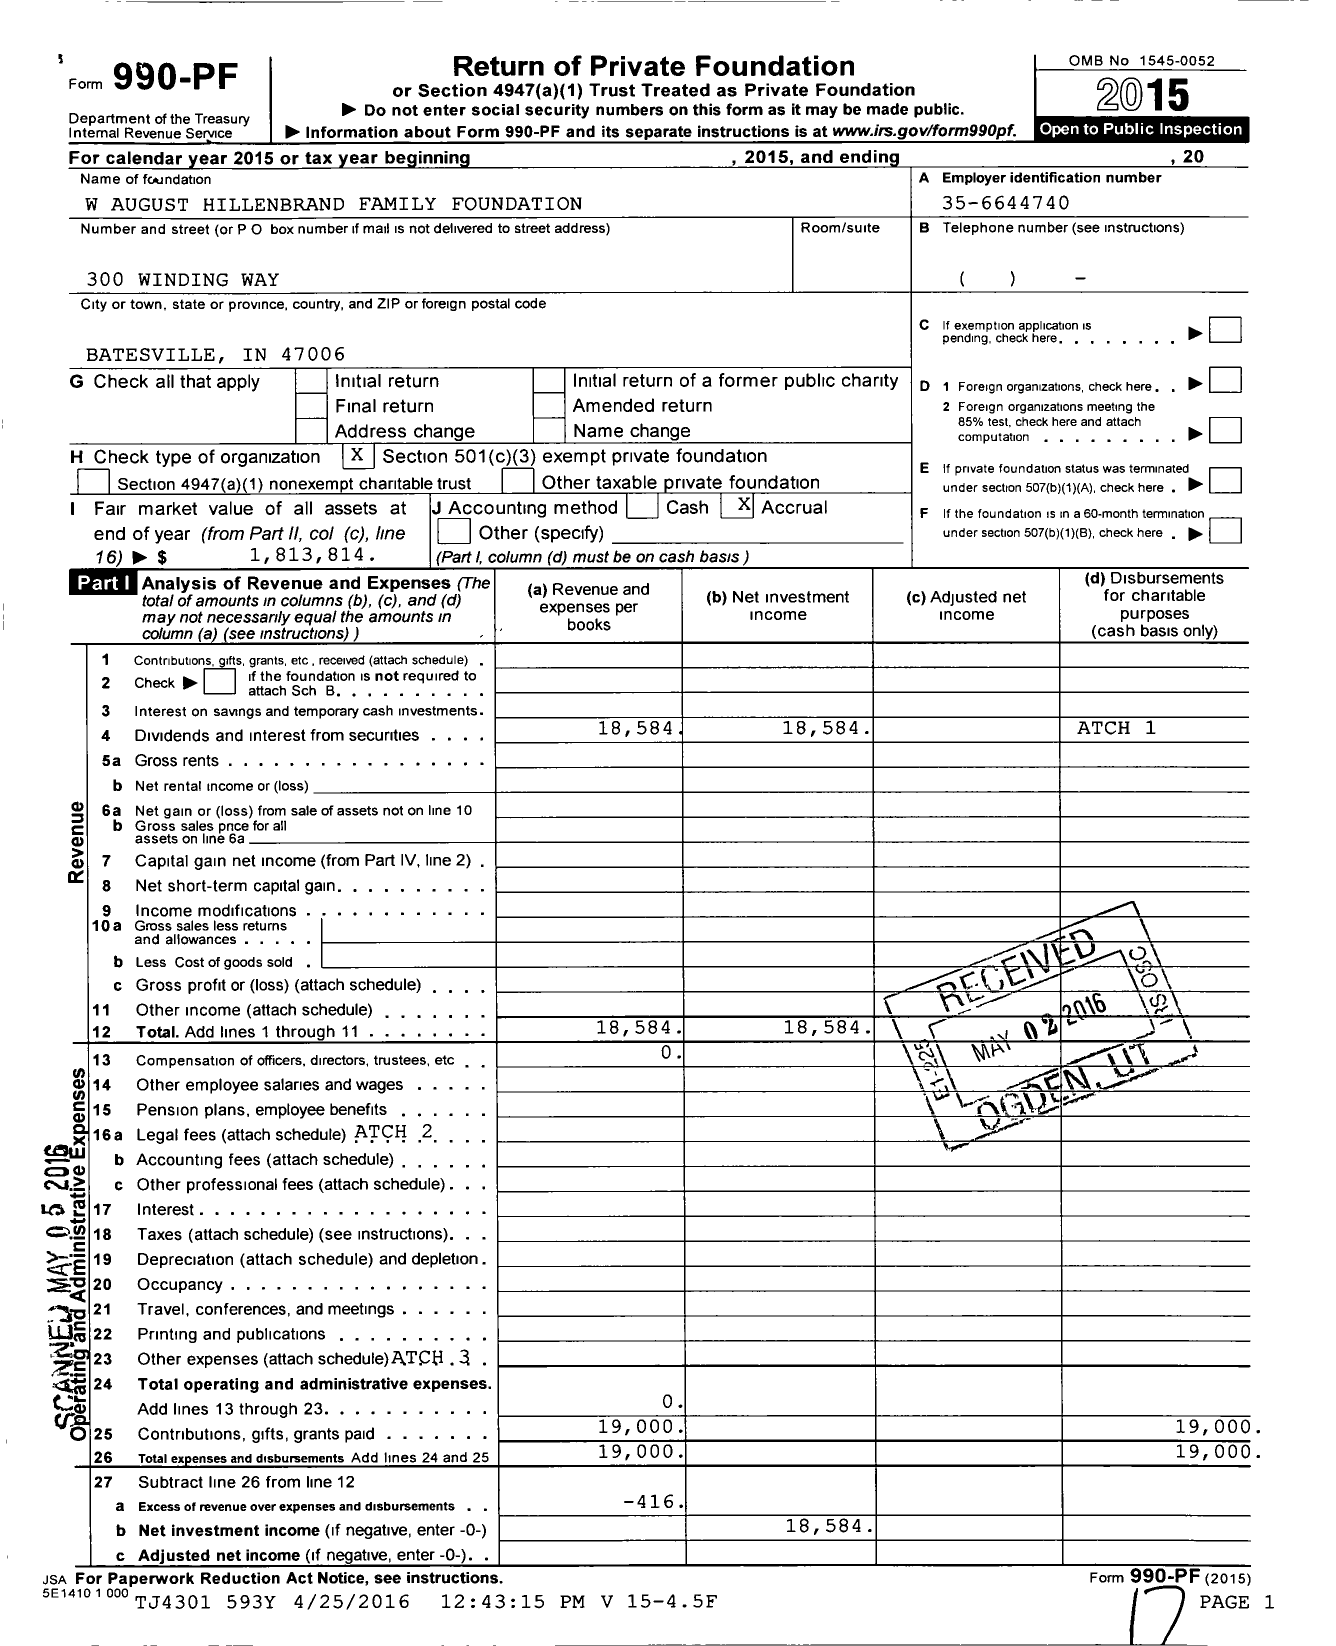 Image of first page of 2015 Form 990PF for W August Hillenbrand Family Foundation